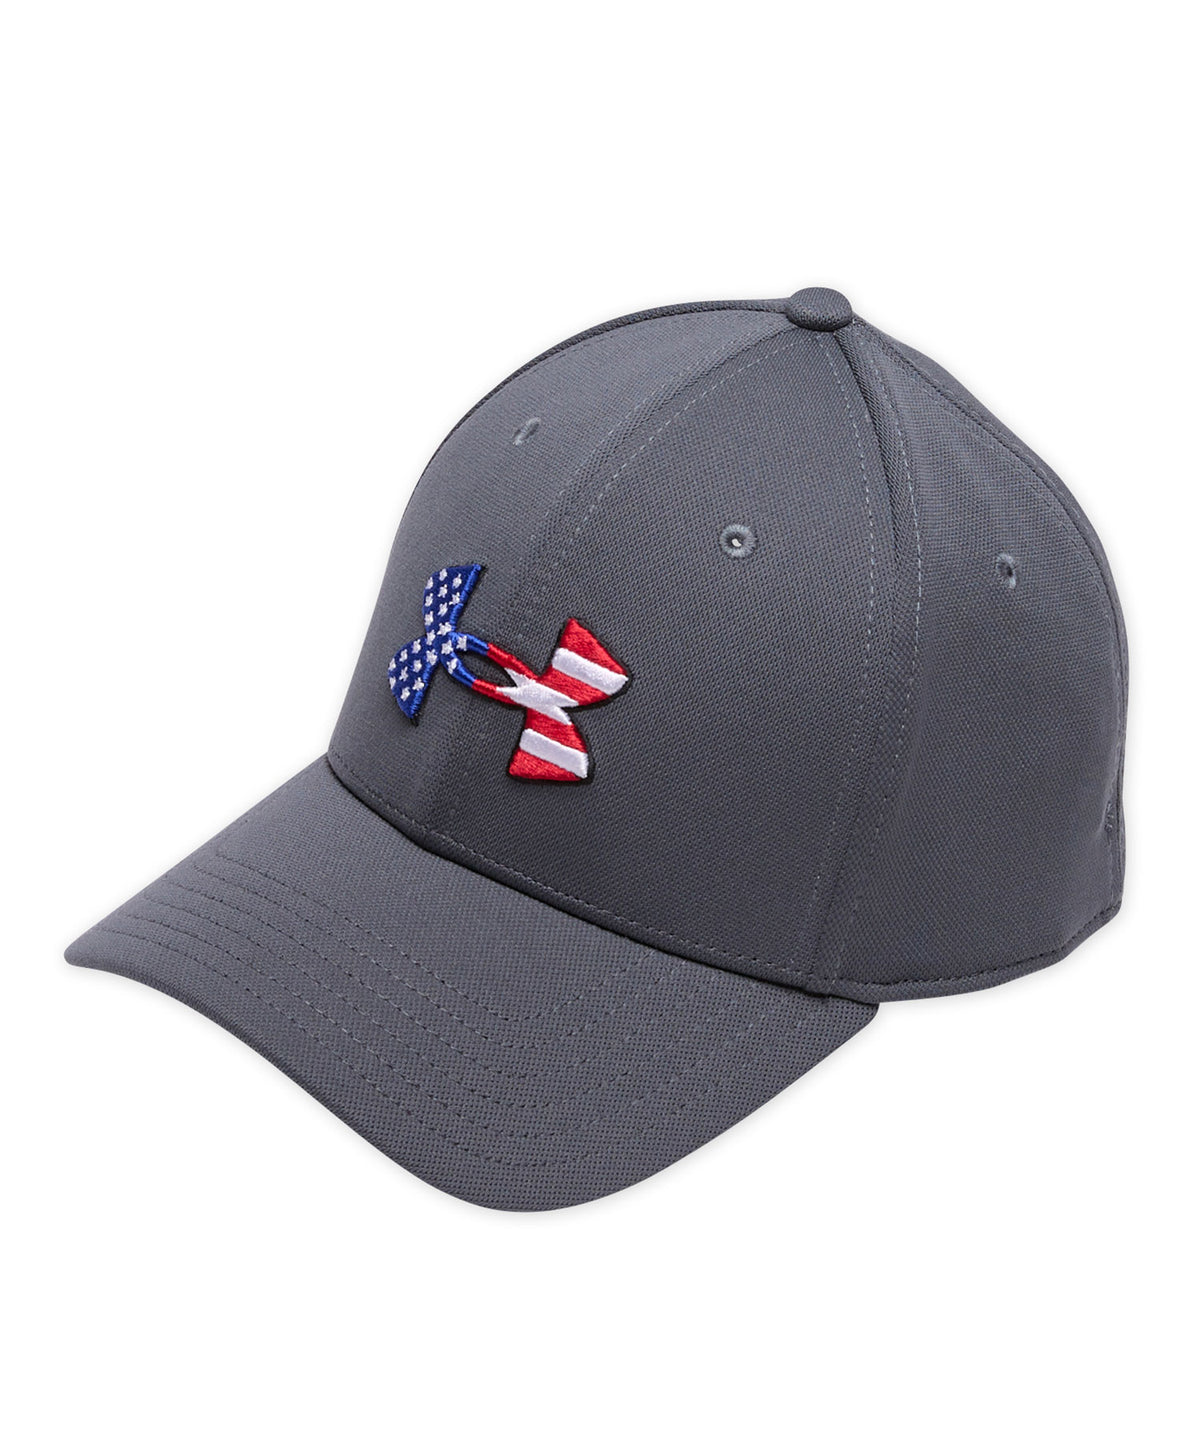 Under Armour Freedom Blitzing Hat, Big & Tall